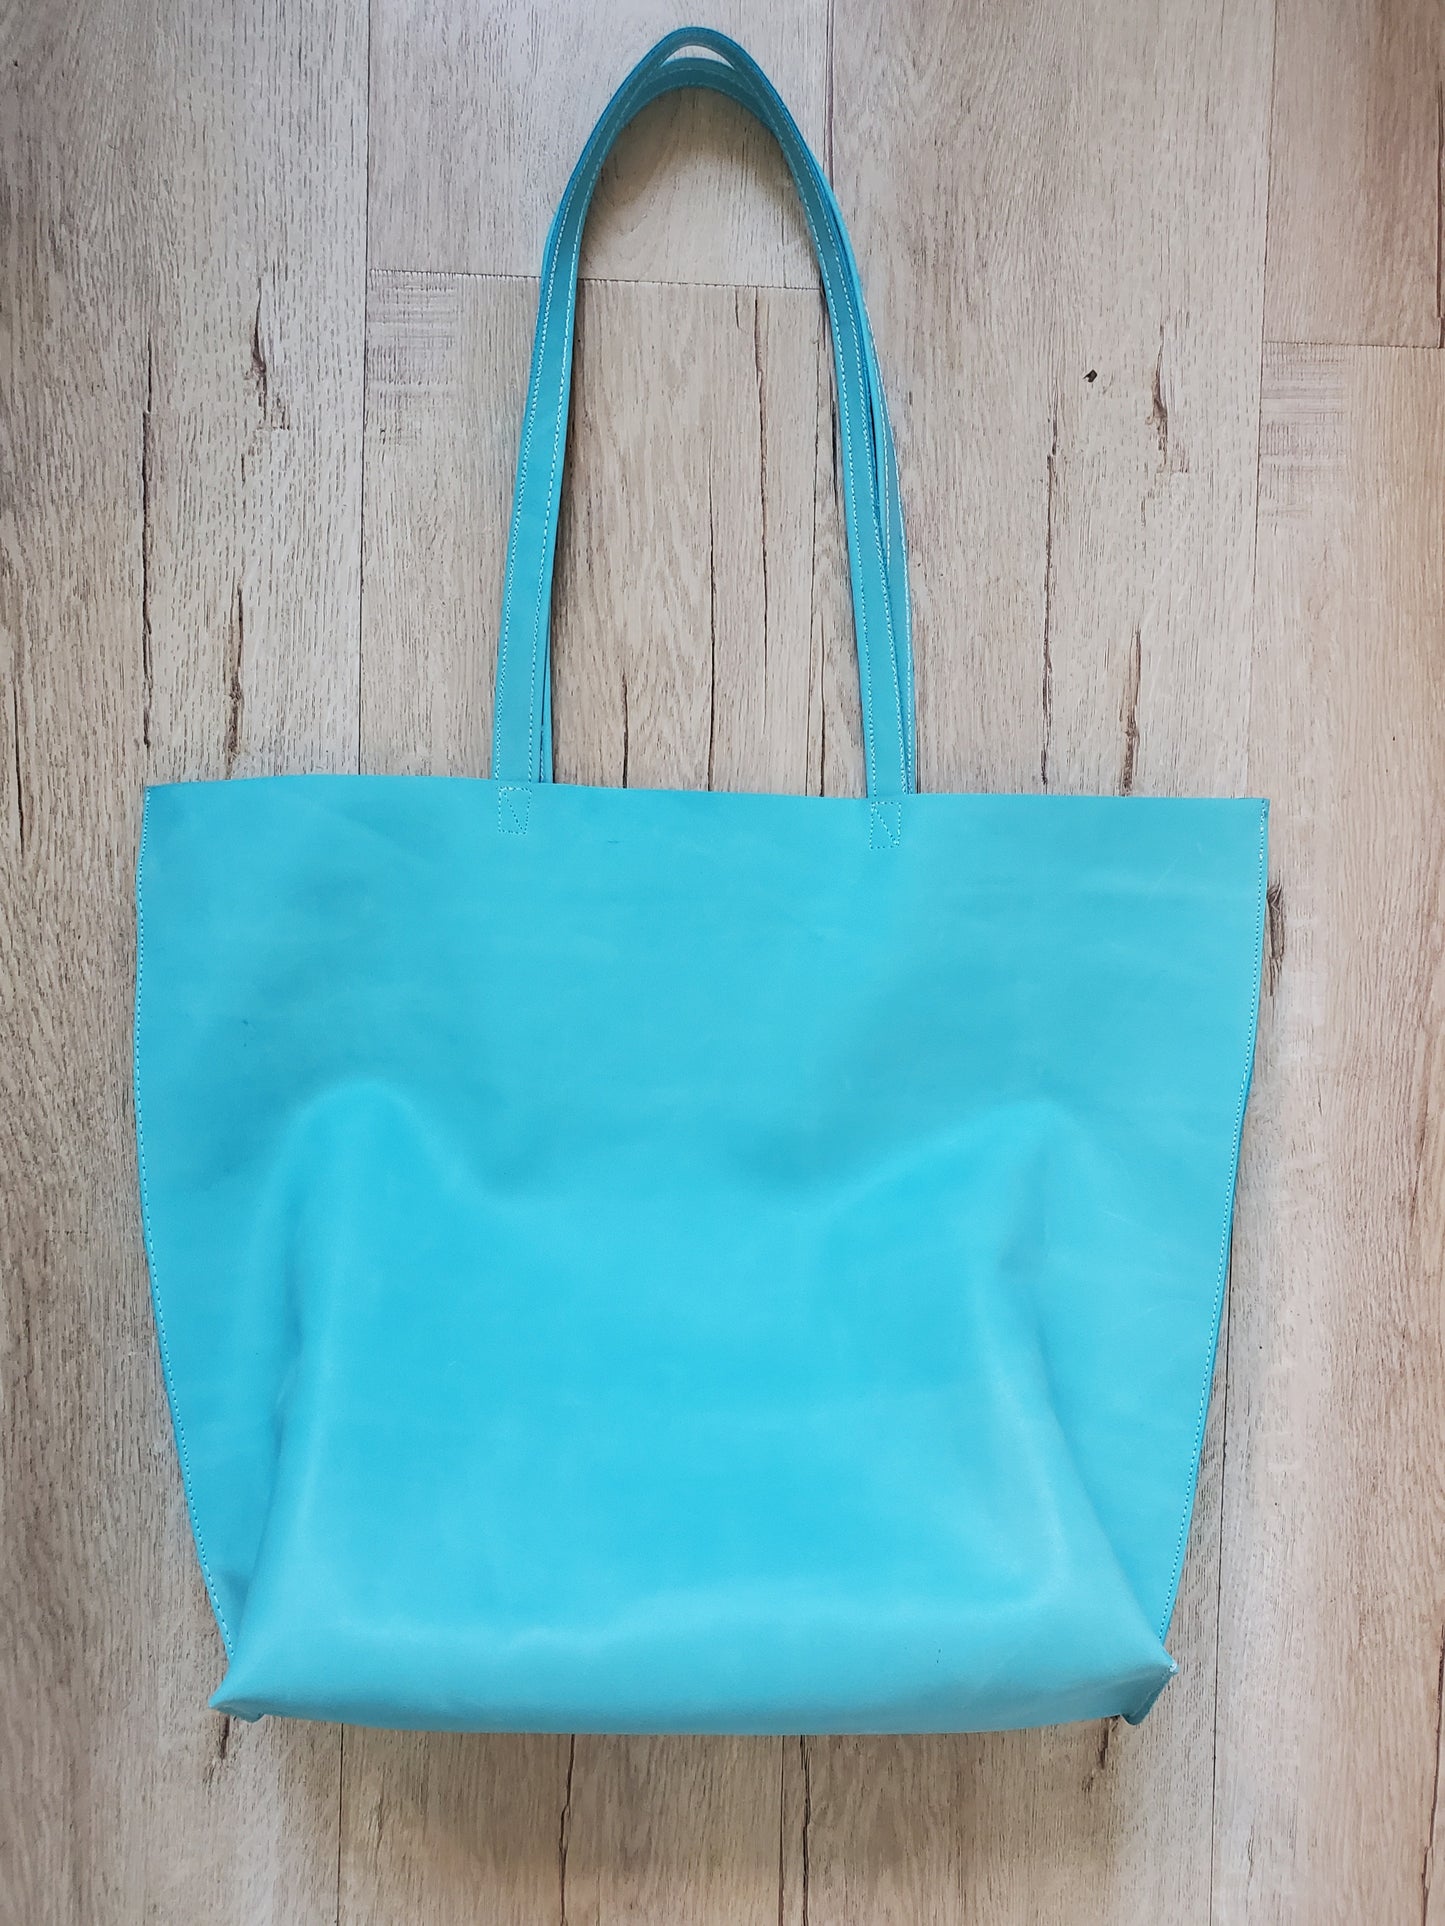 Blue leather 15 inch totebag with 2 inside pockets